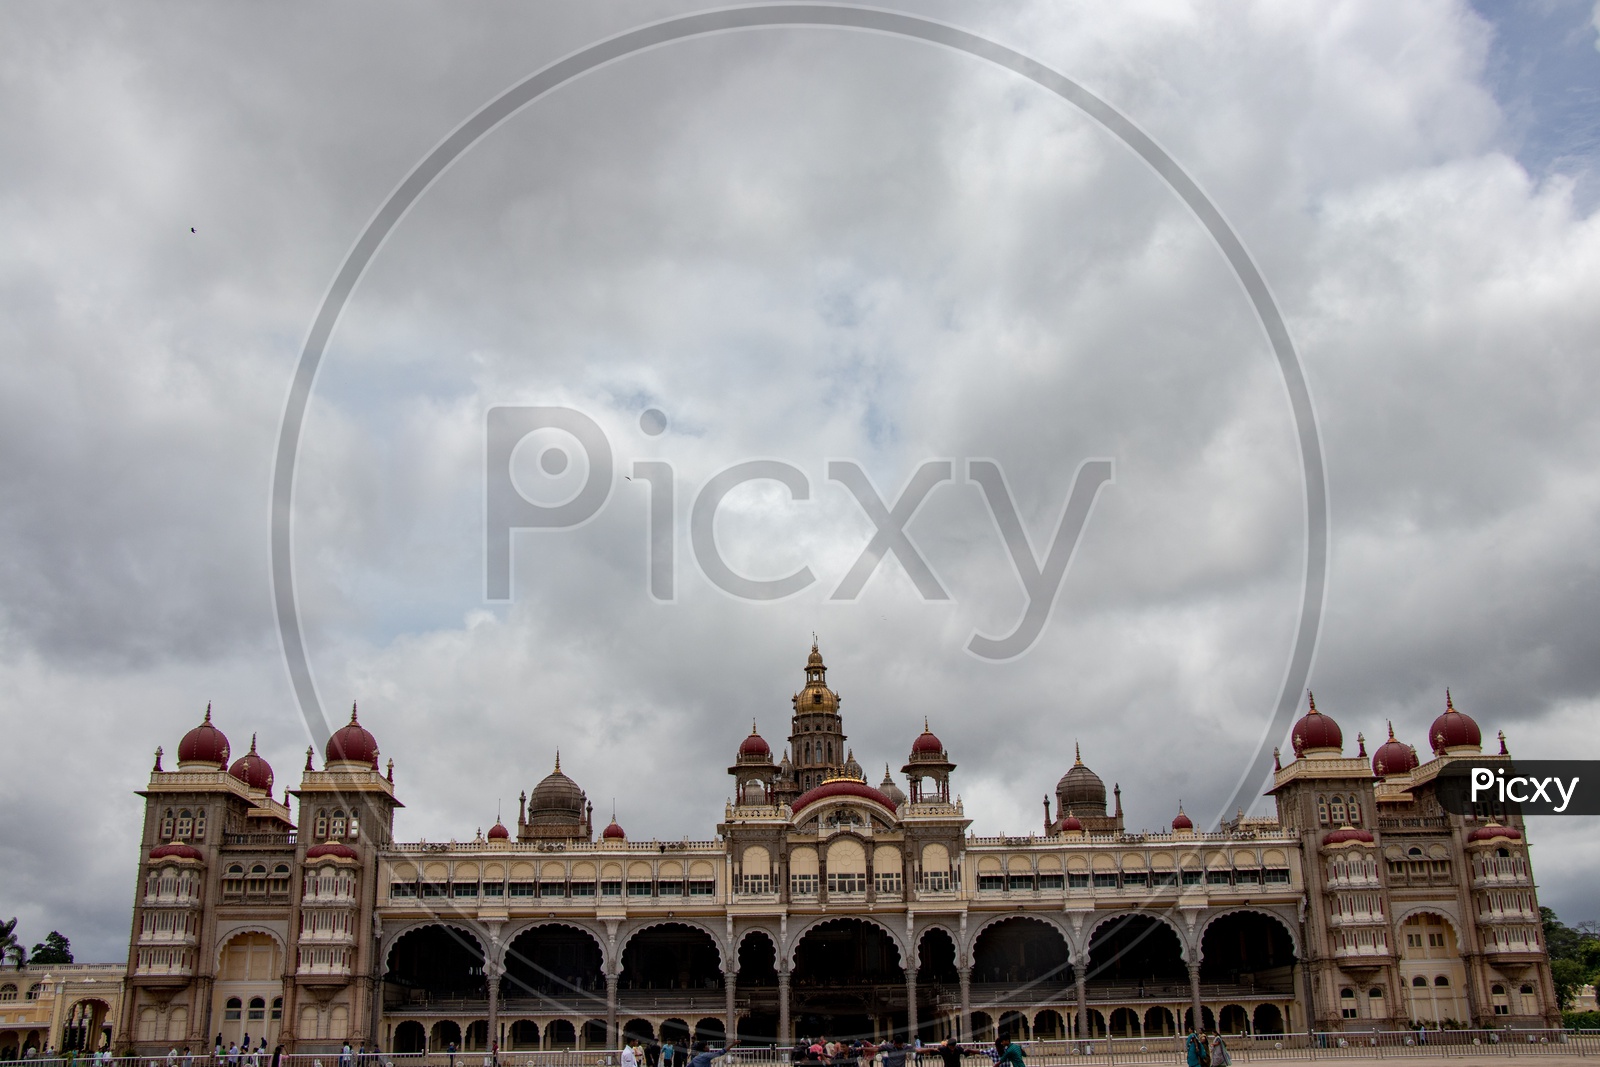 Mysore Palace On a Cloudy Day With Dark Clouds